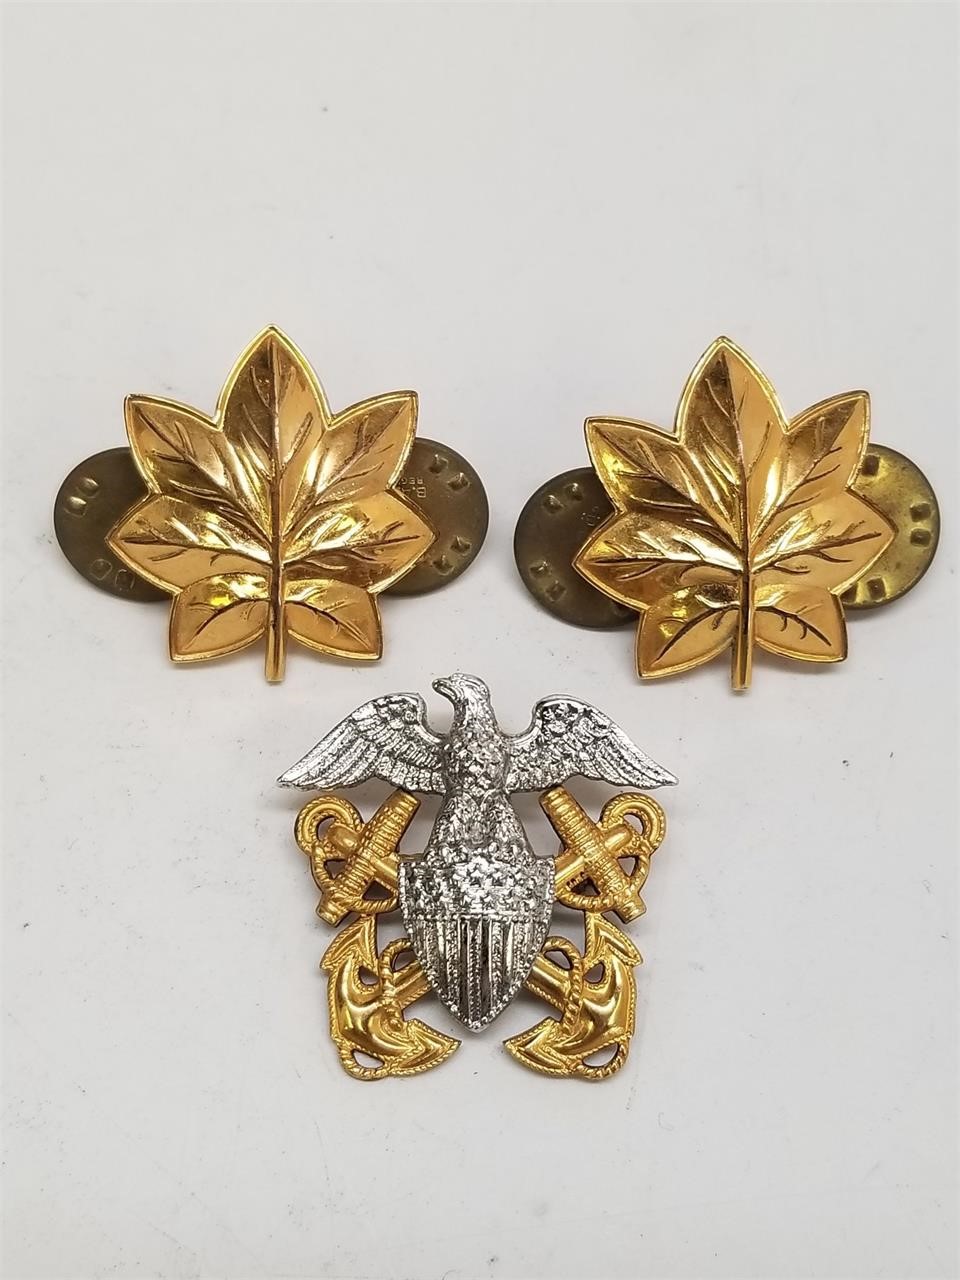 Three Gold Filled Military Pins